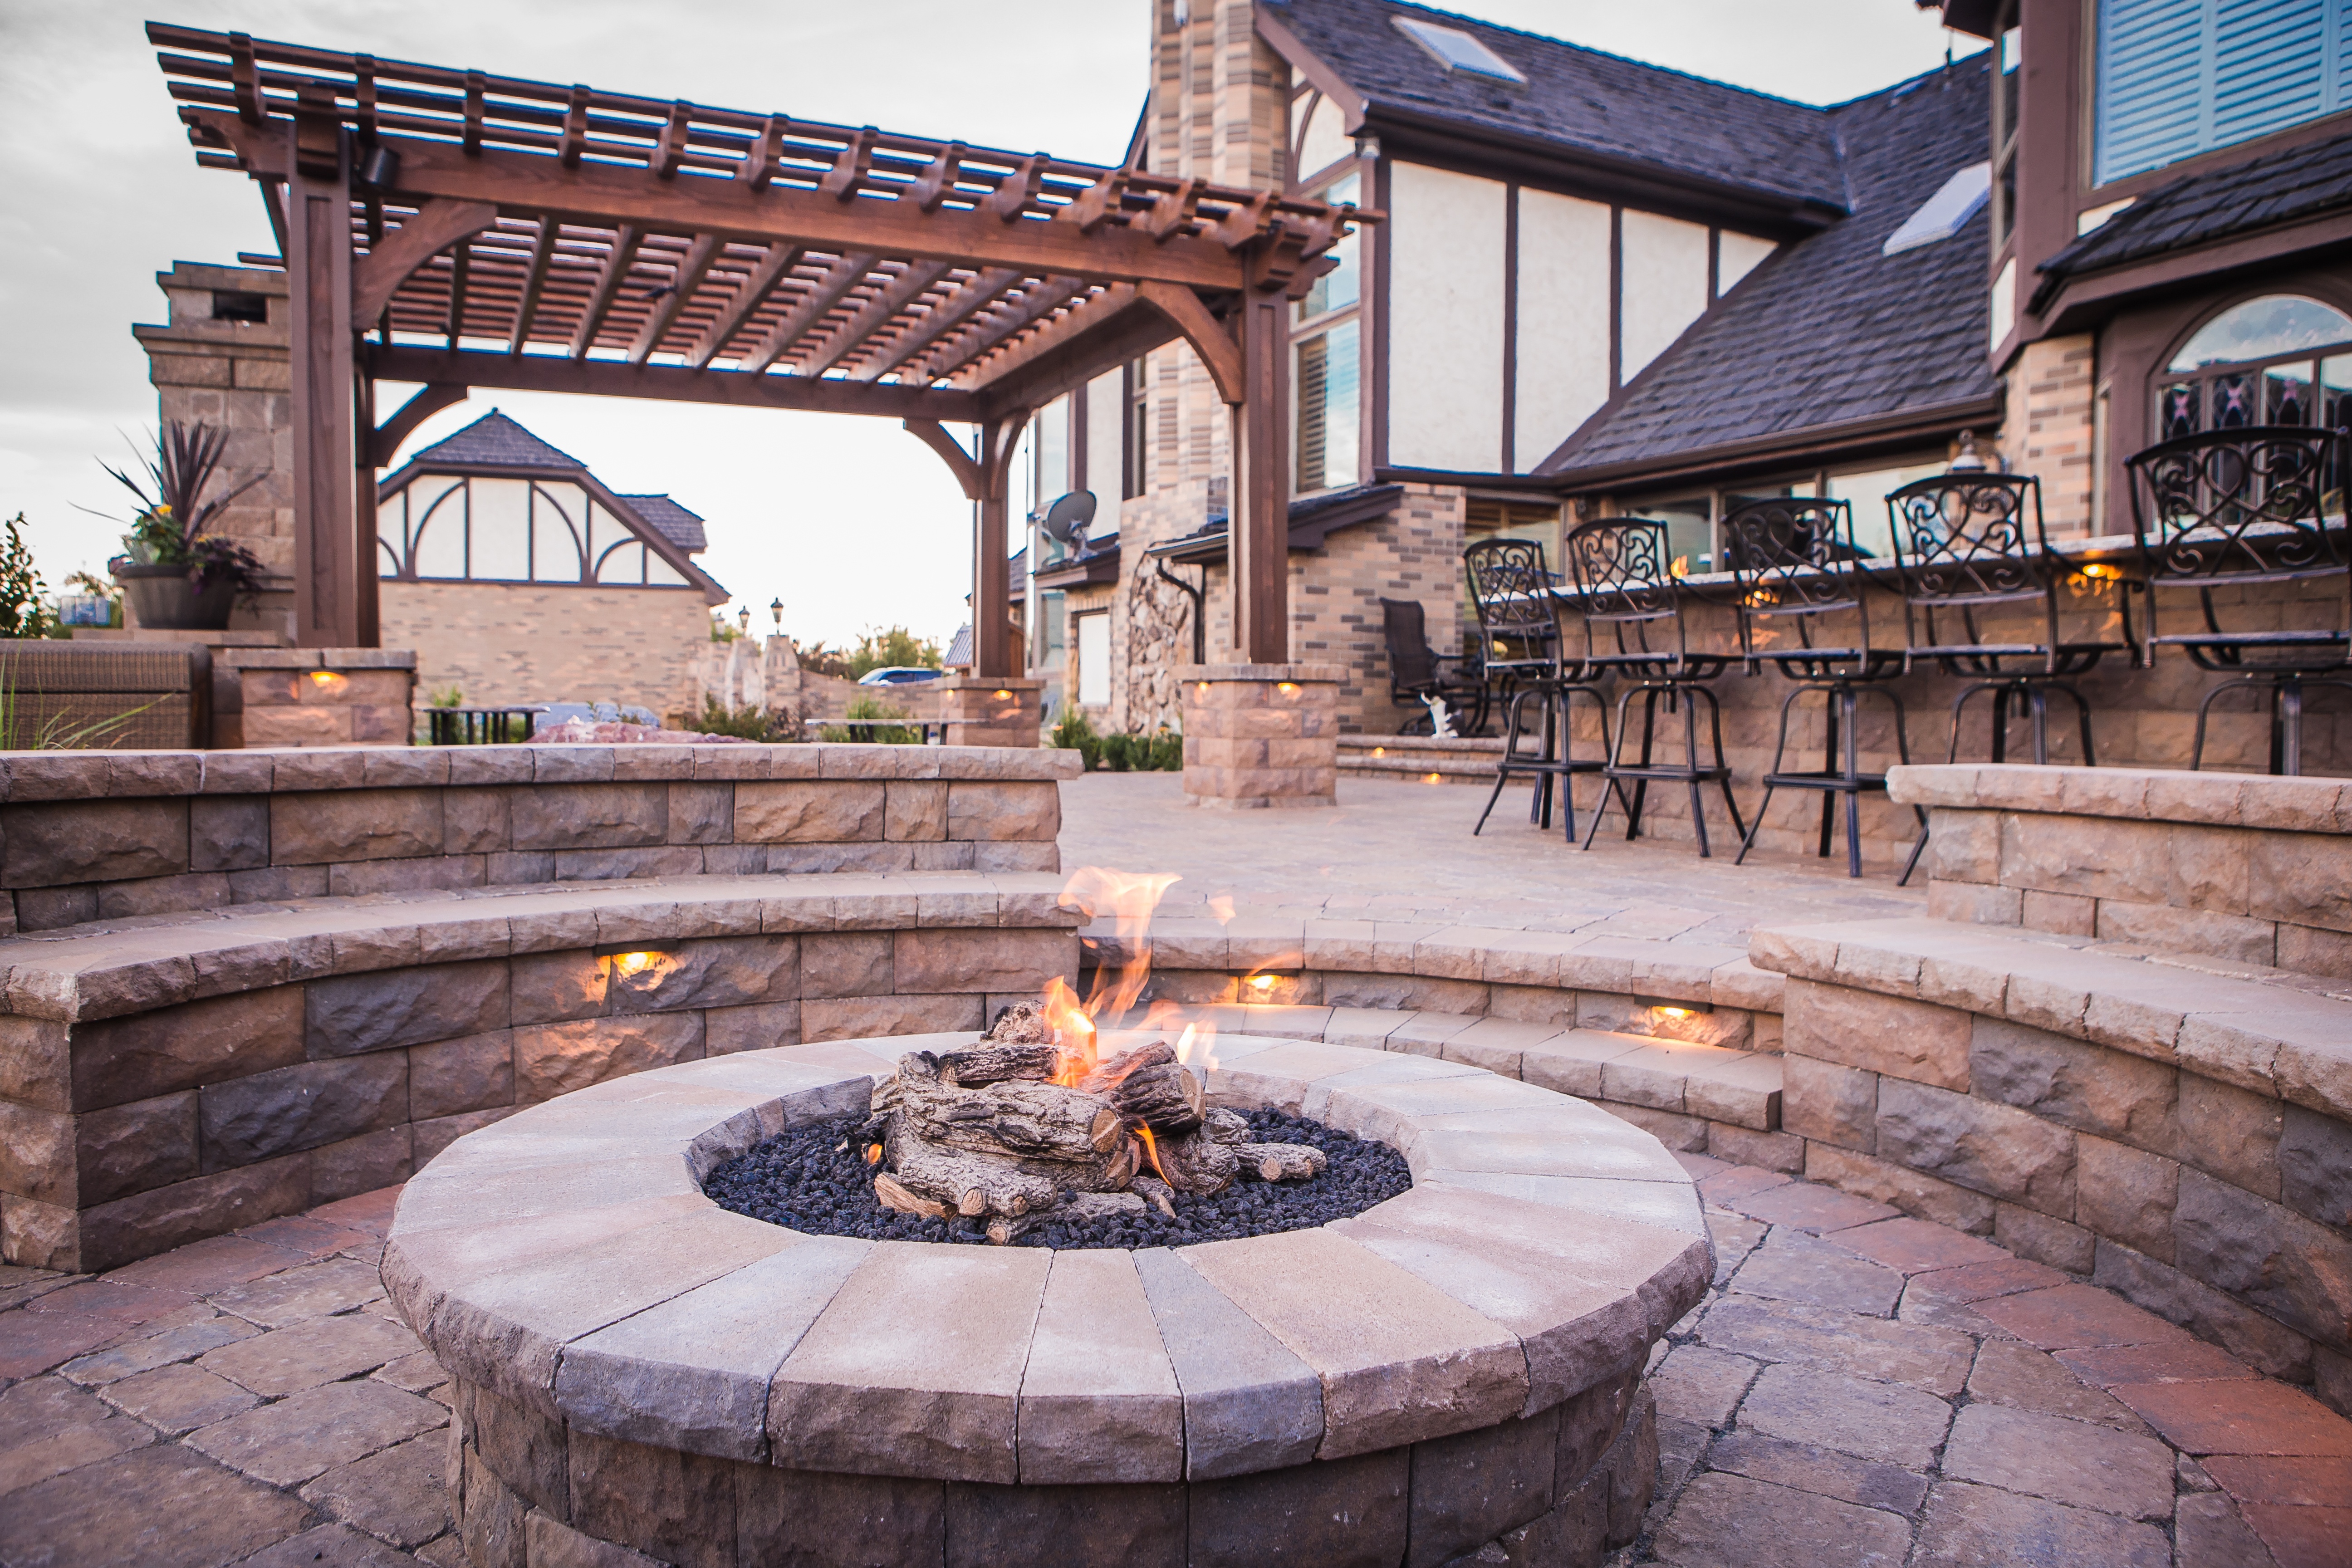 Backyard Fire Pits The Ultimate Guide, Design Outdoor Fire Pit Area